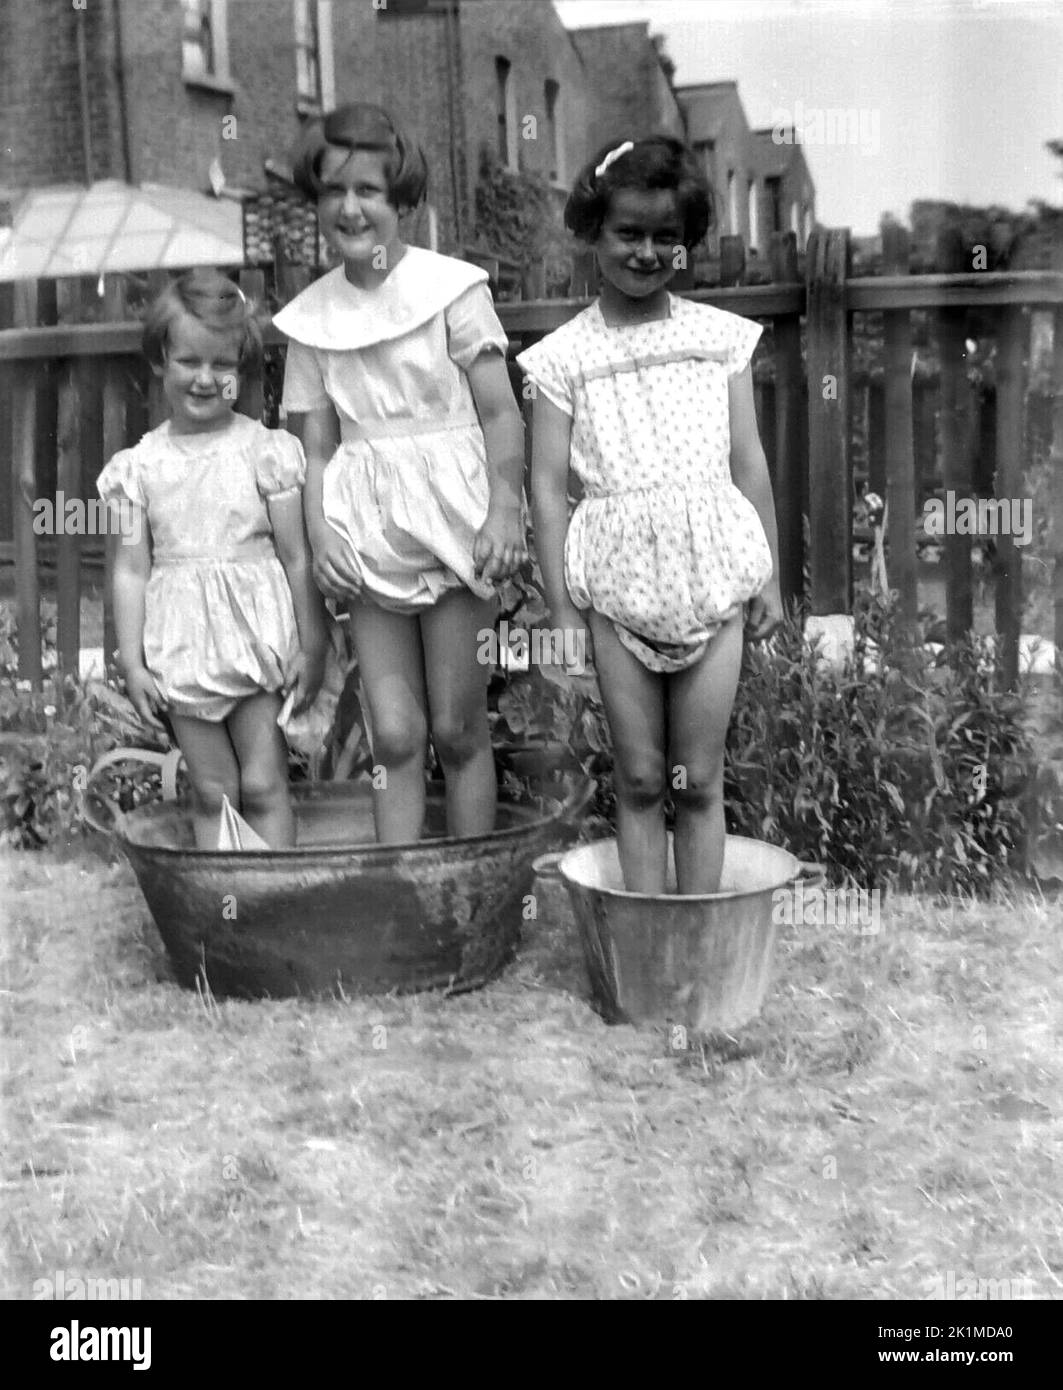 1940s, historical, three young girls playing outside, standing in two metal buckets in a back garden of a terraced house, England, UK. One of the buckets is a traditonal galvanised tin wash tub common for laundry and washing clothes in this era. Stock Photo